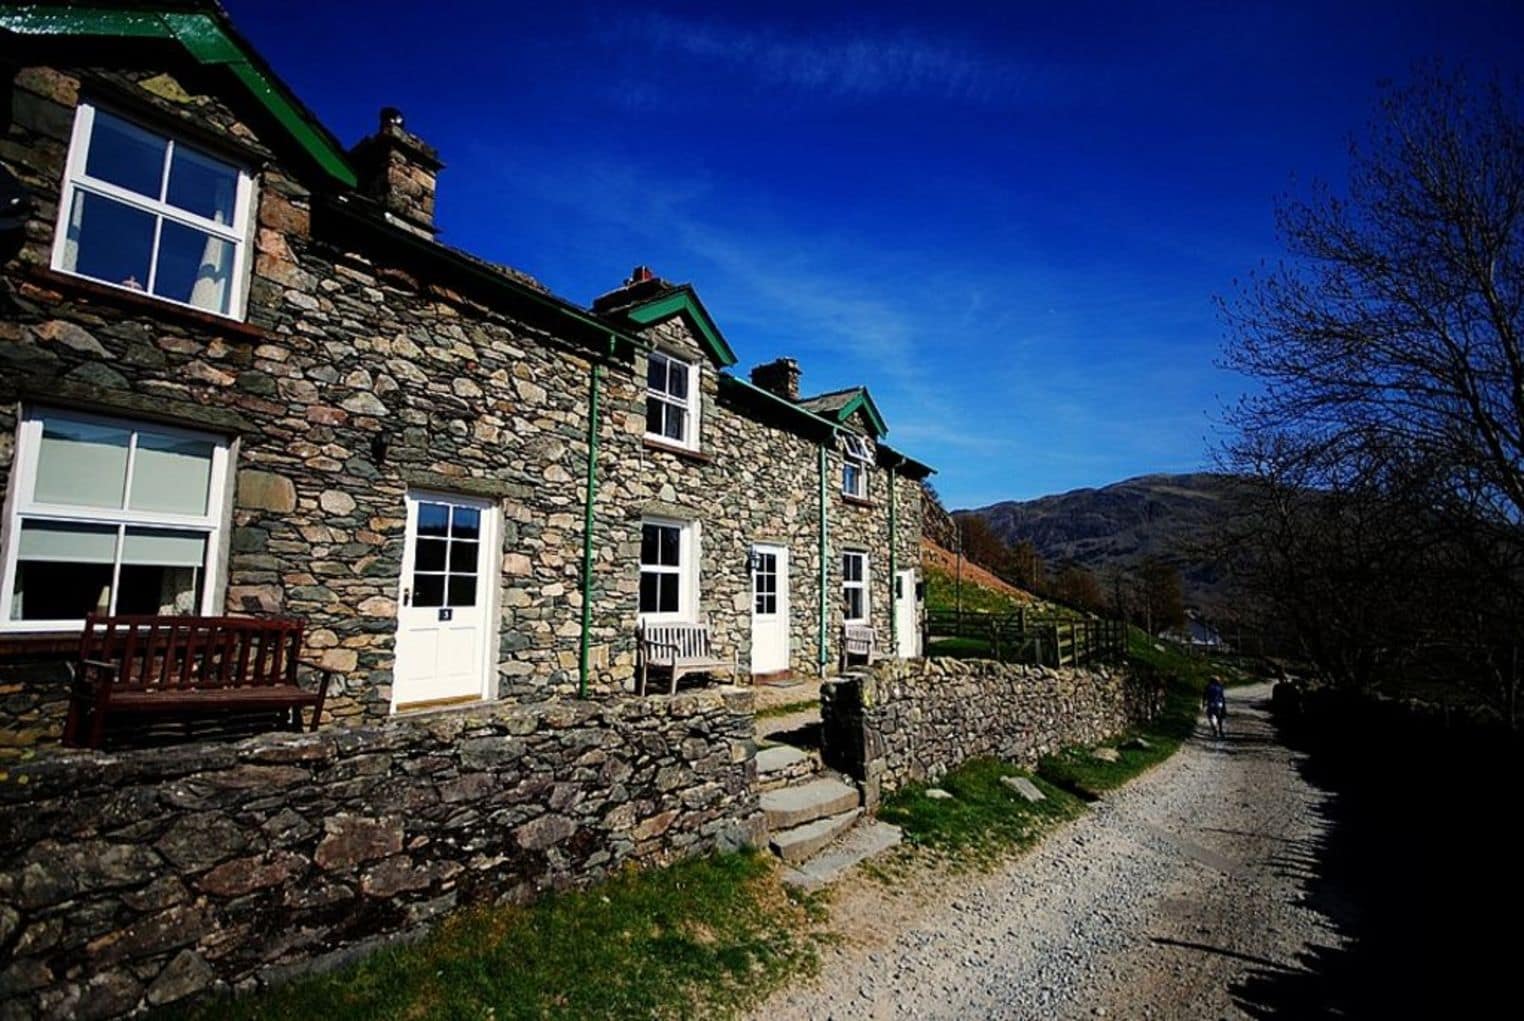 How to book holiday cottages in the Lake District